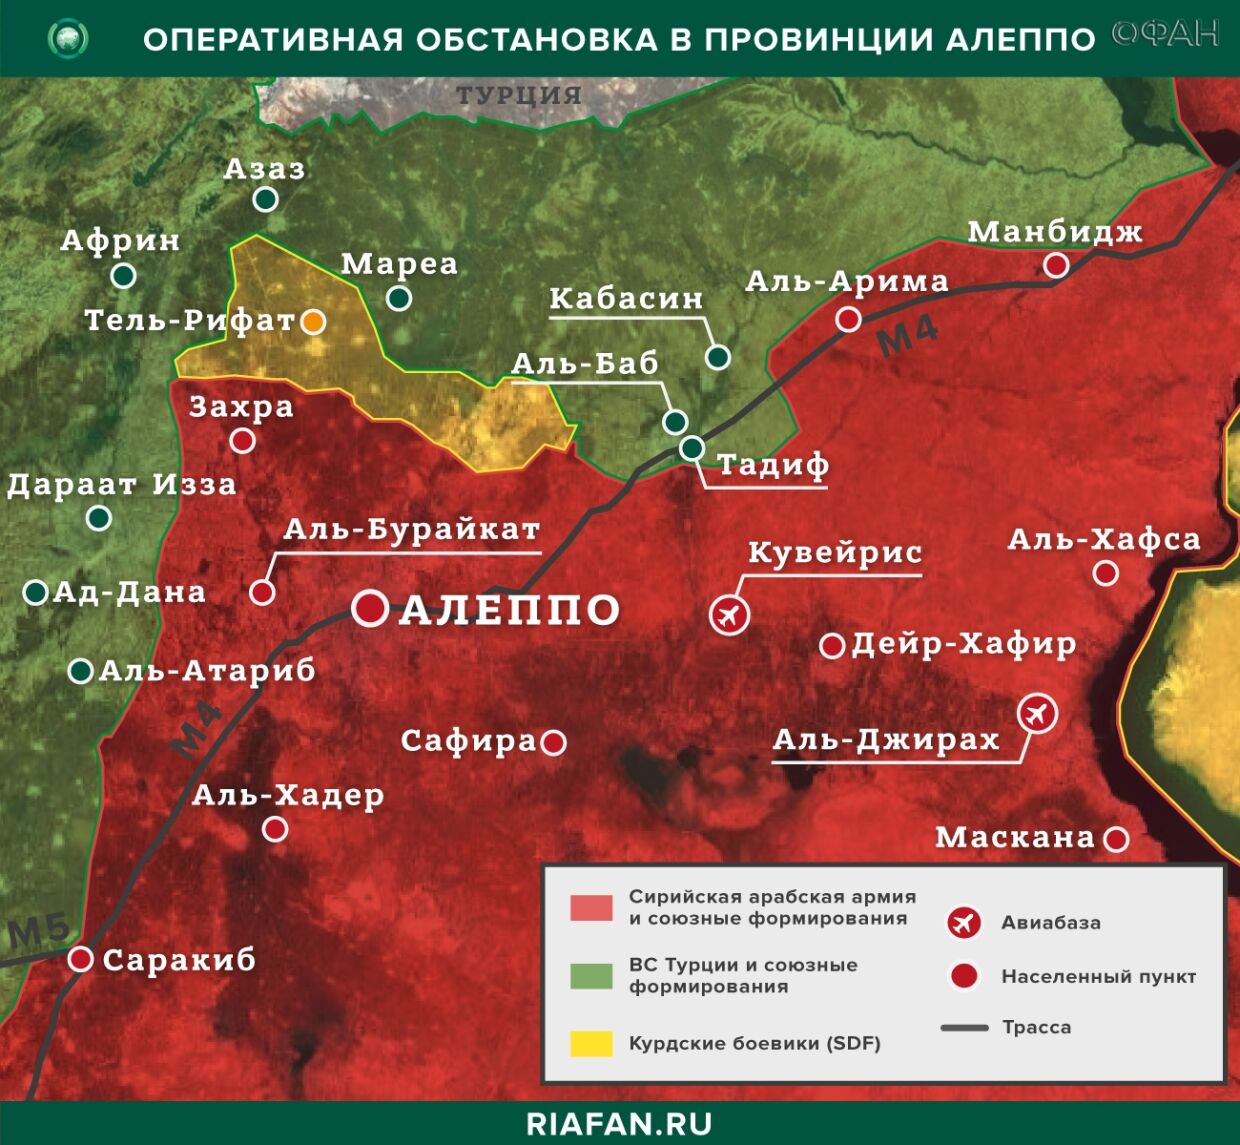 Syria the results of the day on 14 April 06.00: HTSh confronted the Turks in Idlib, Syrian injured in explosion in Afrin